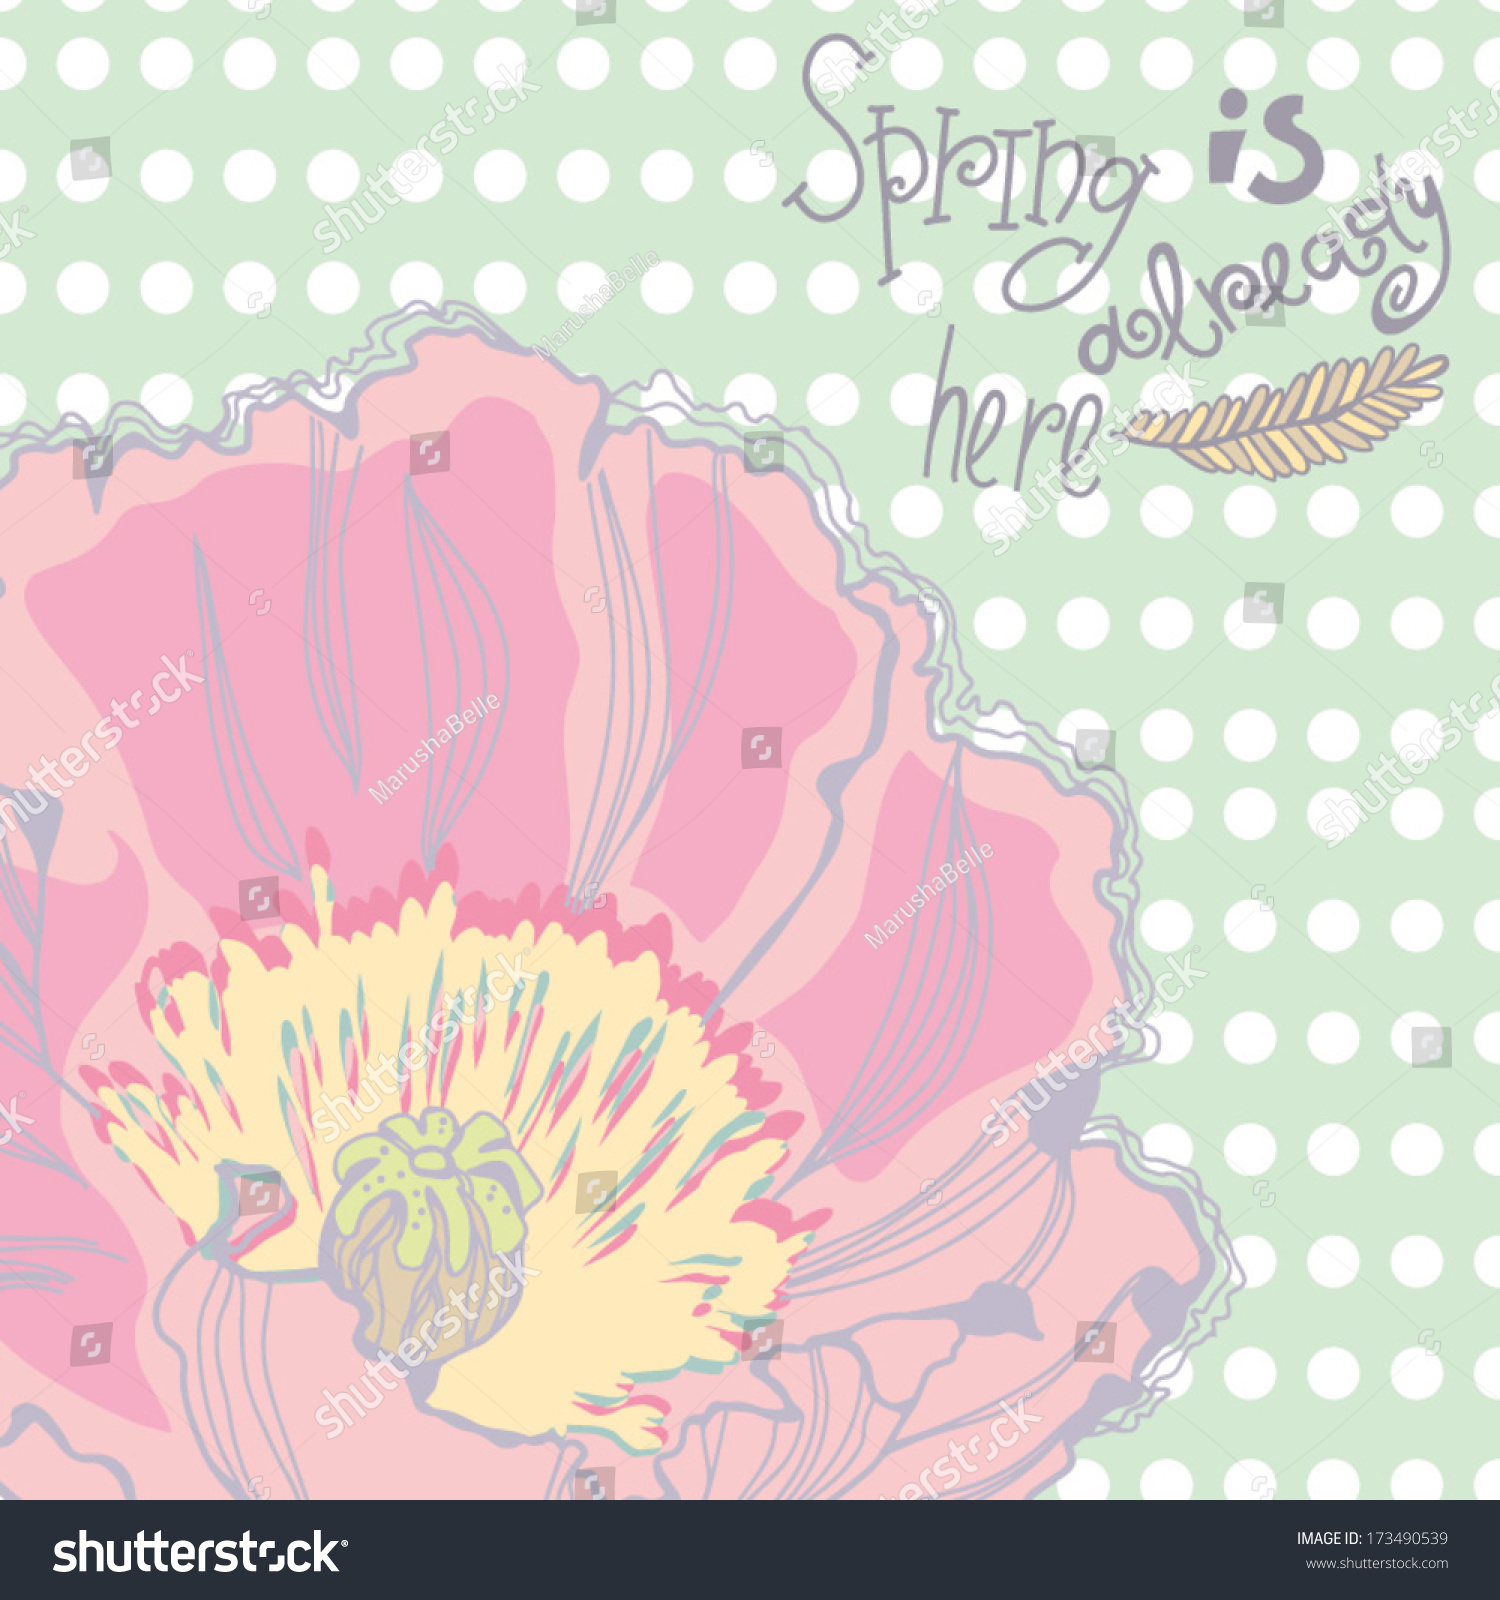 Beautiful spring floral background with poppy. Vintage cute design invitation with place for text. #173490539